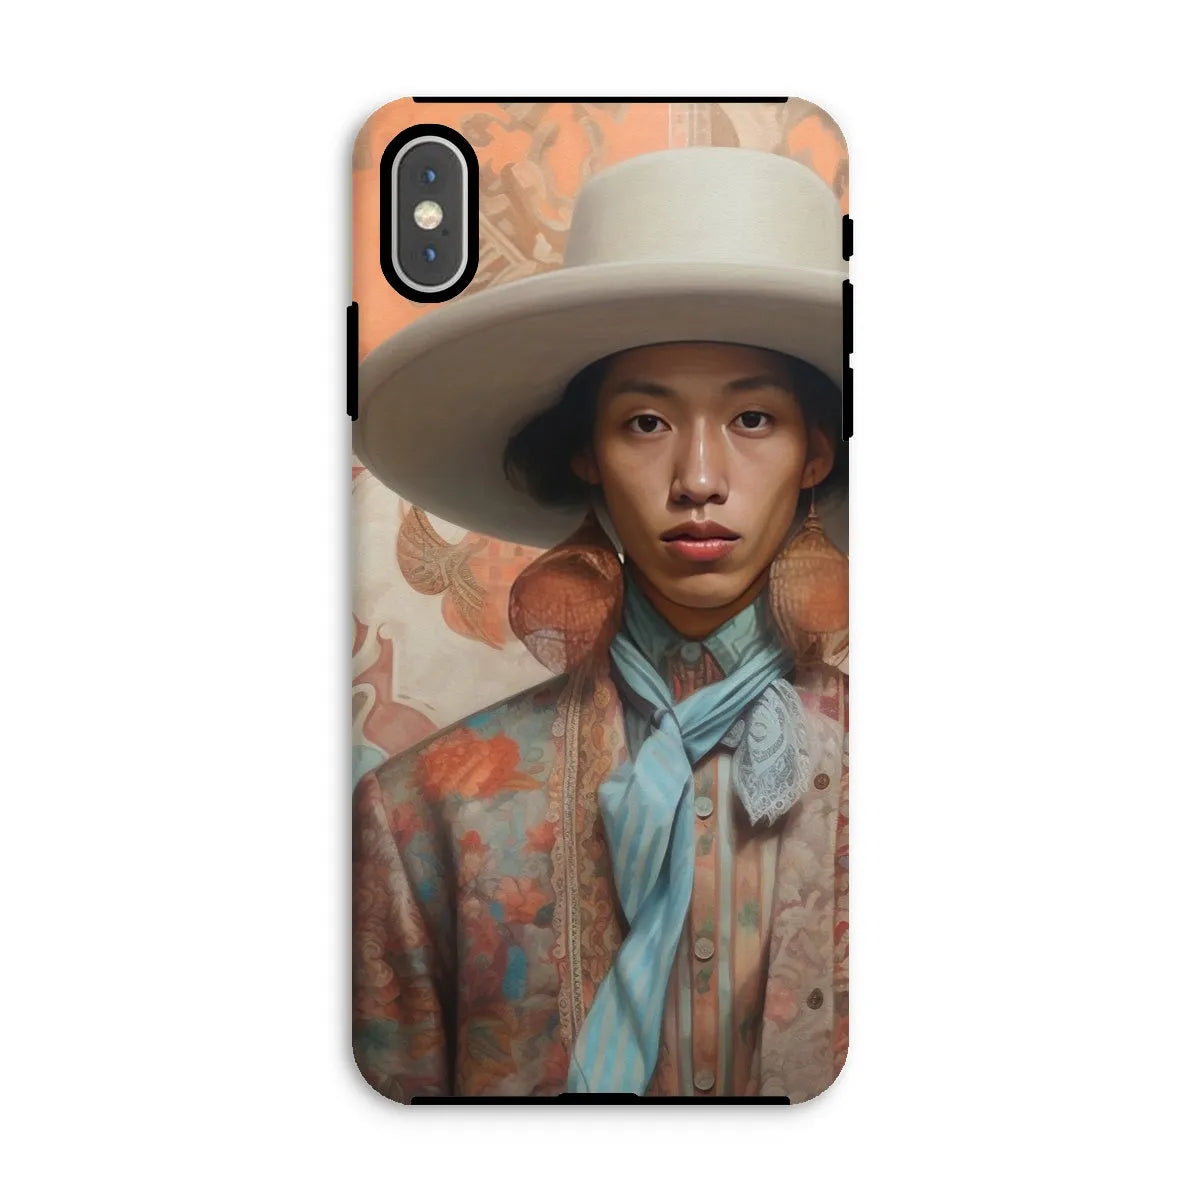 Iyaan - Gay Malay Asian Cowboy Aesthetic Art Phone Case - Iphone Xs Max / Matte - Mobile Phone Cases - Aesthetic Art